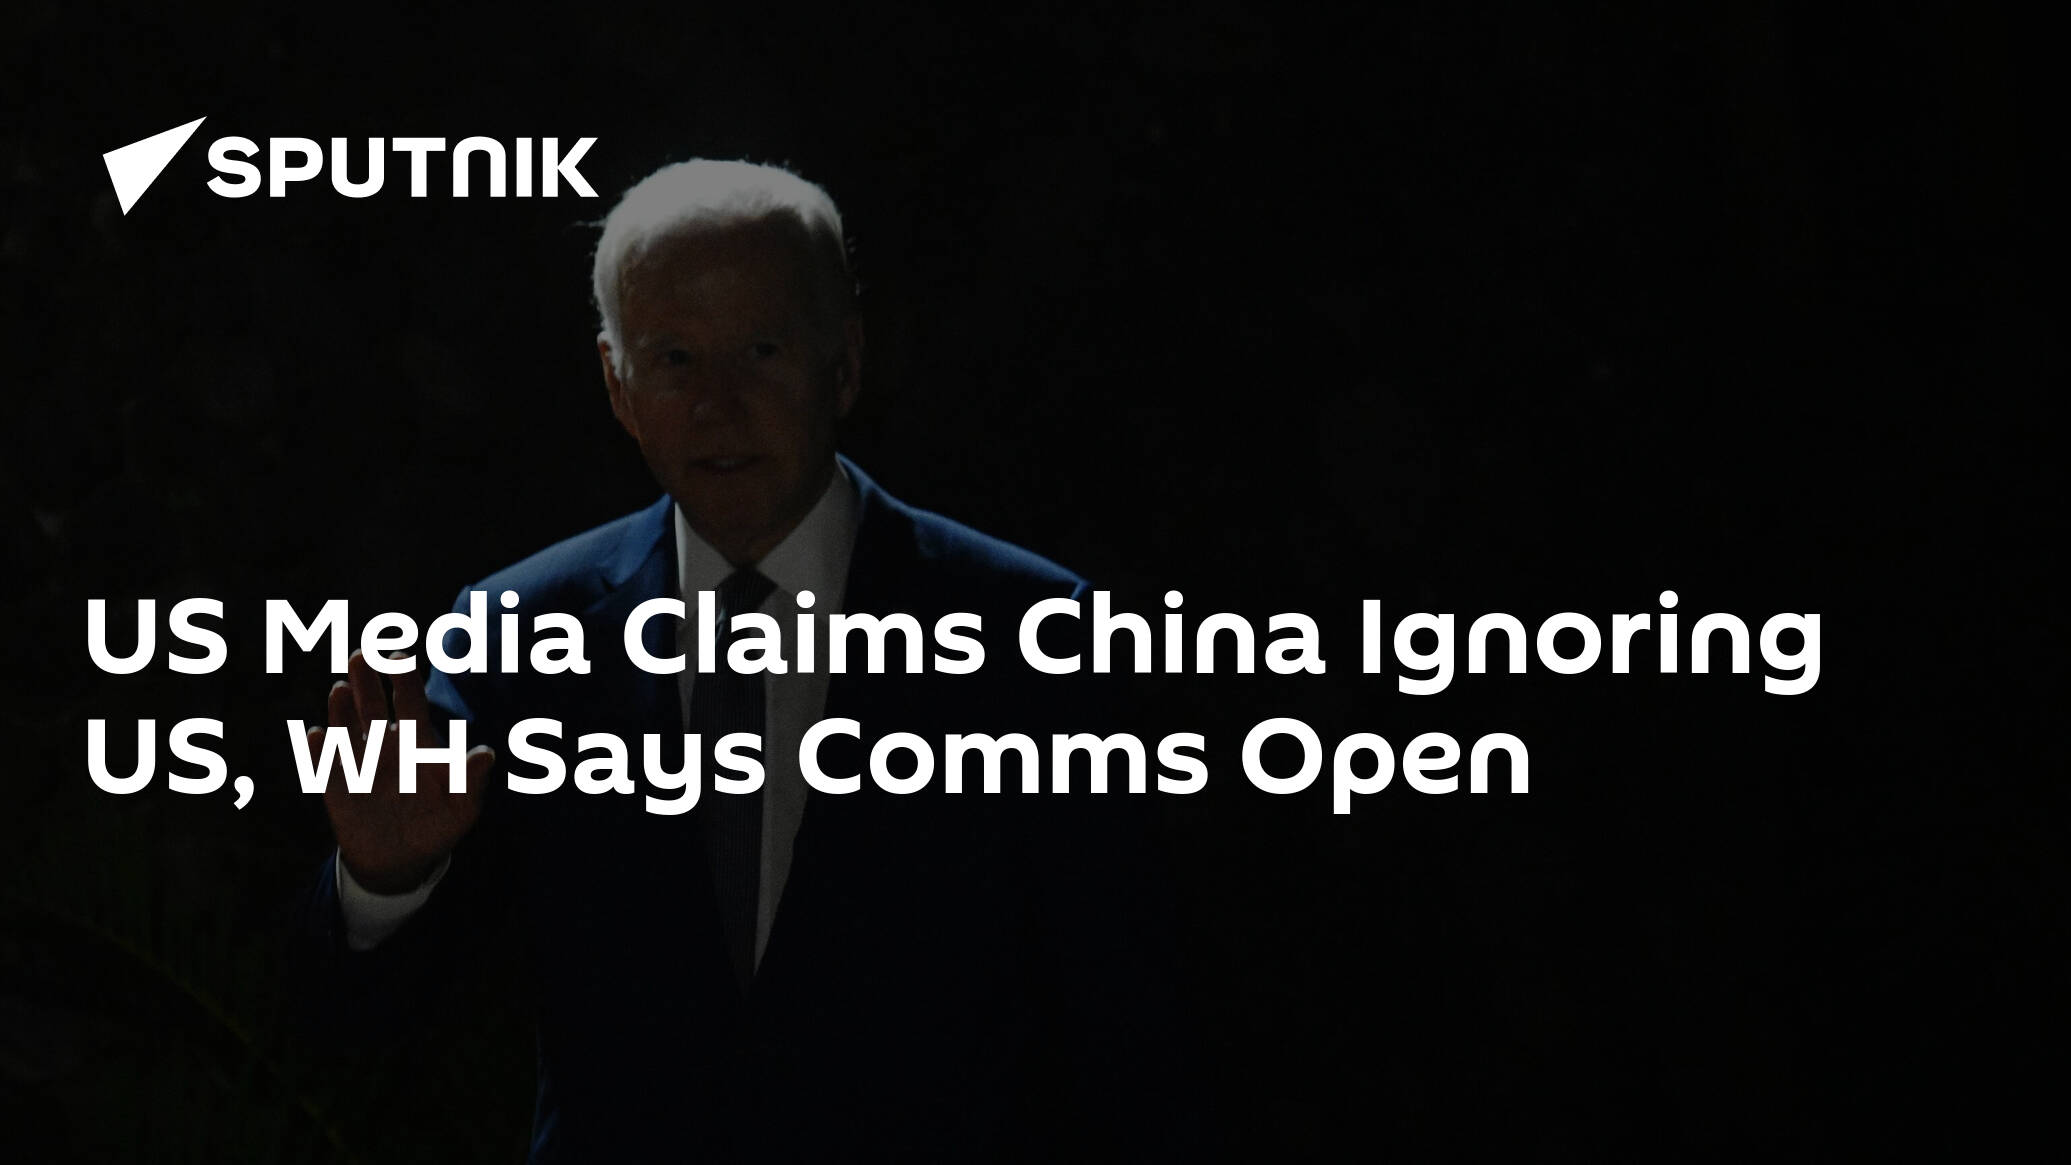 US Media Claims China Ignoring US, WH Says Comms Open